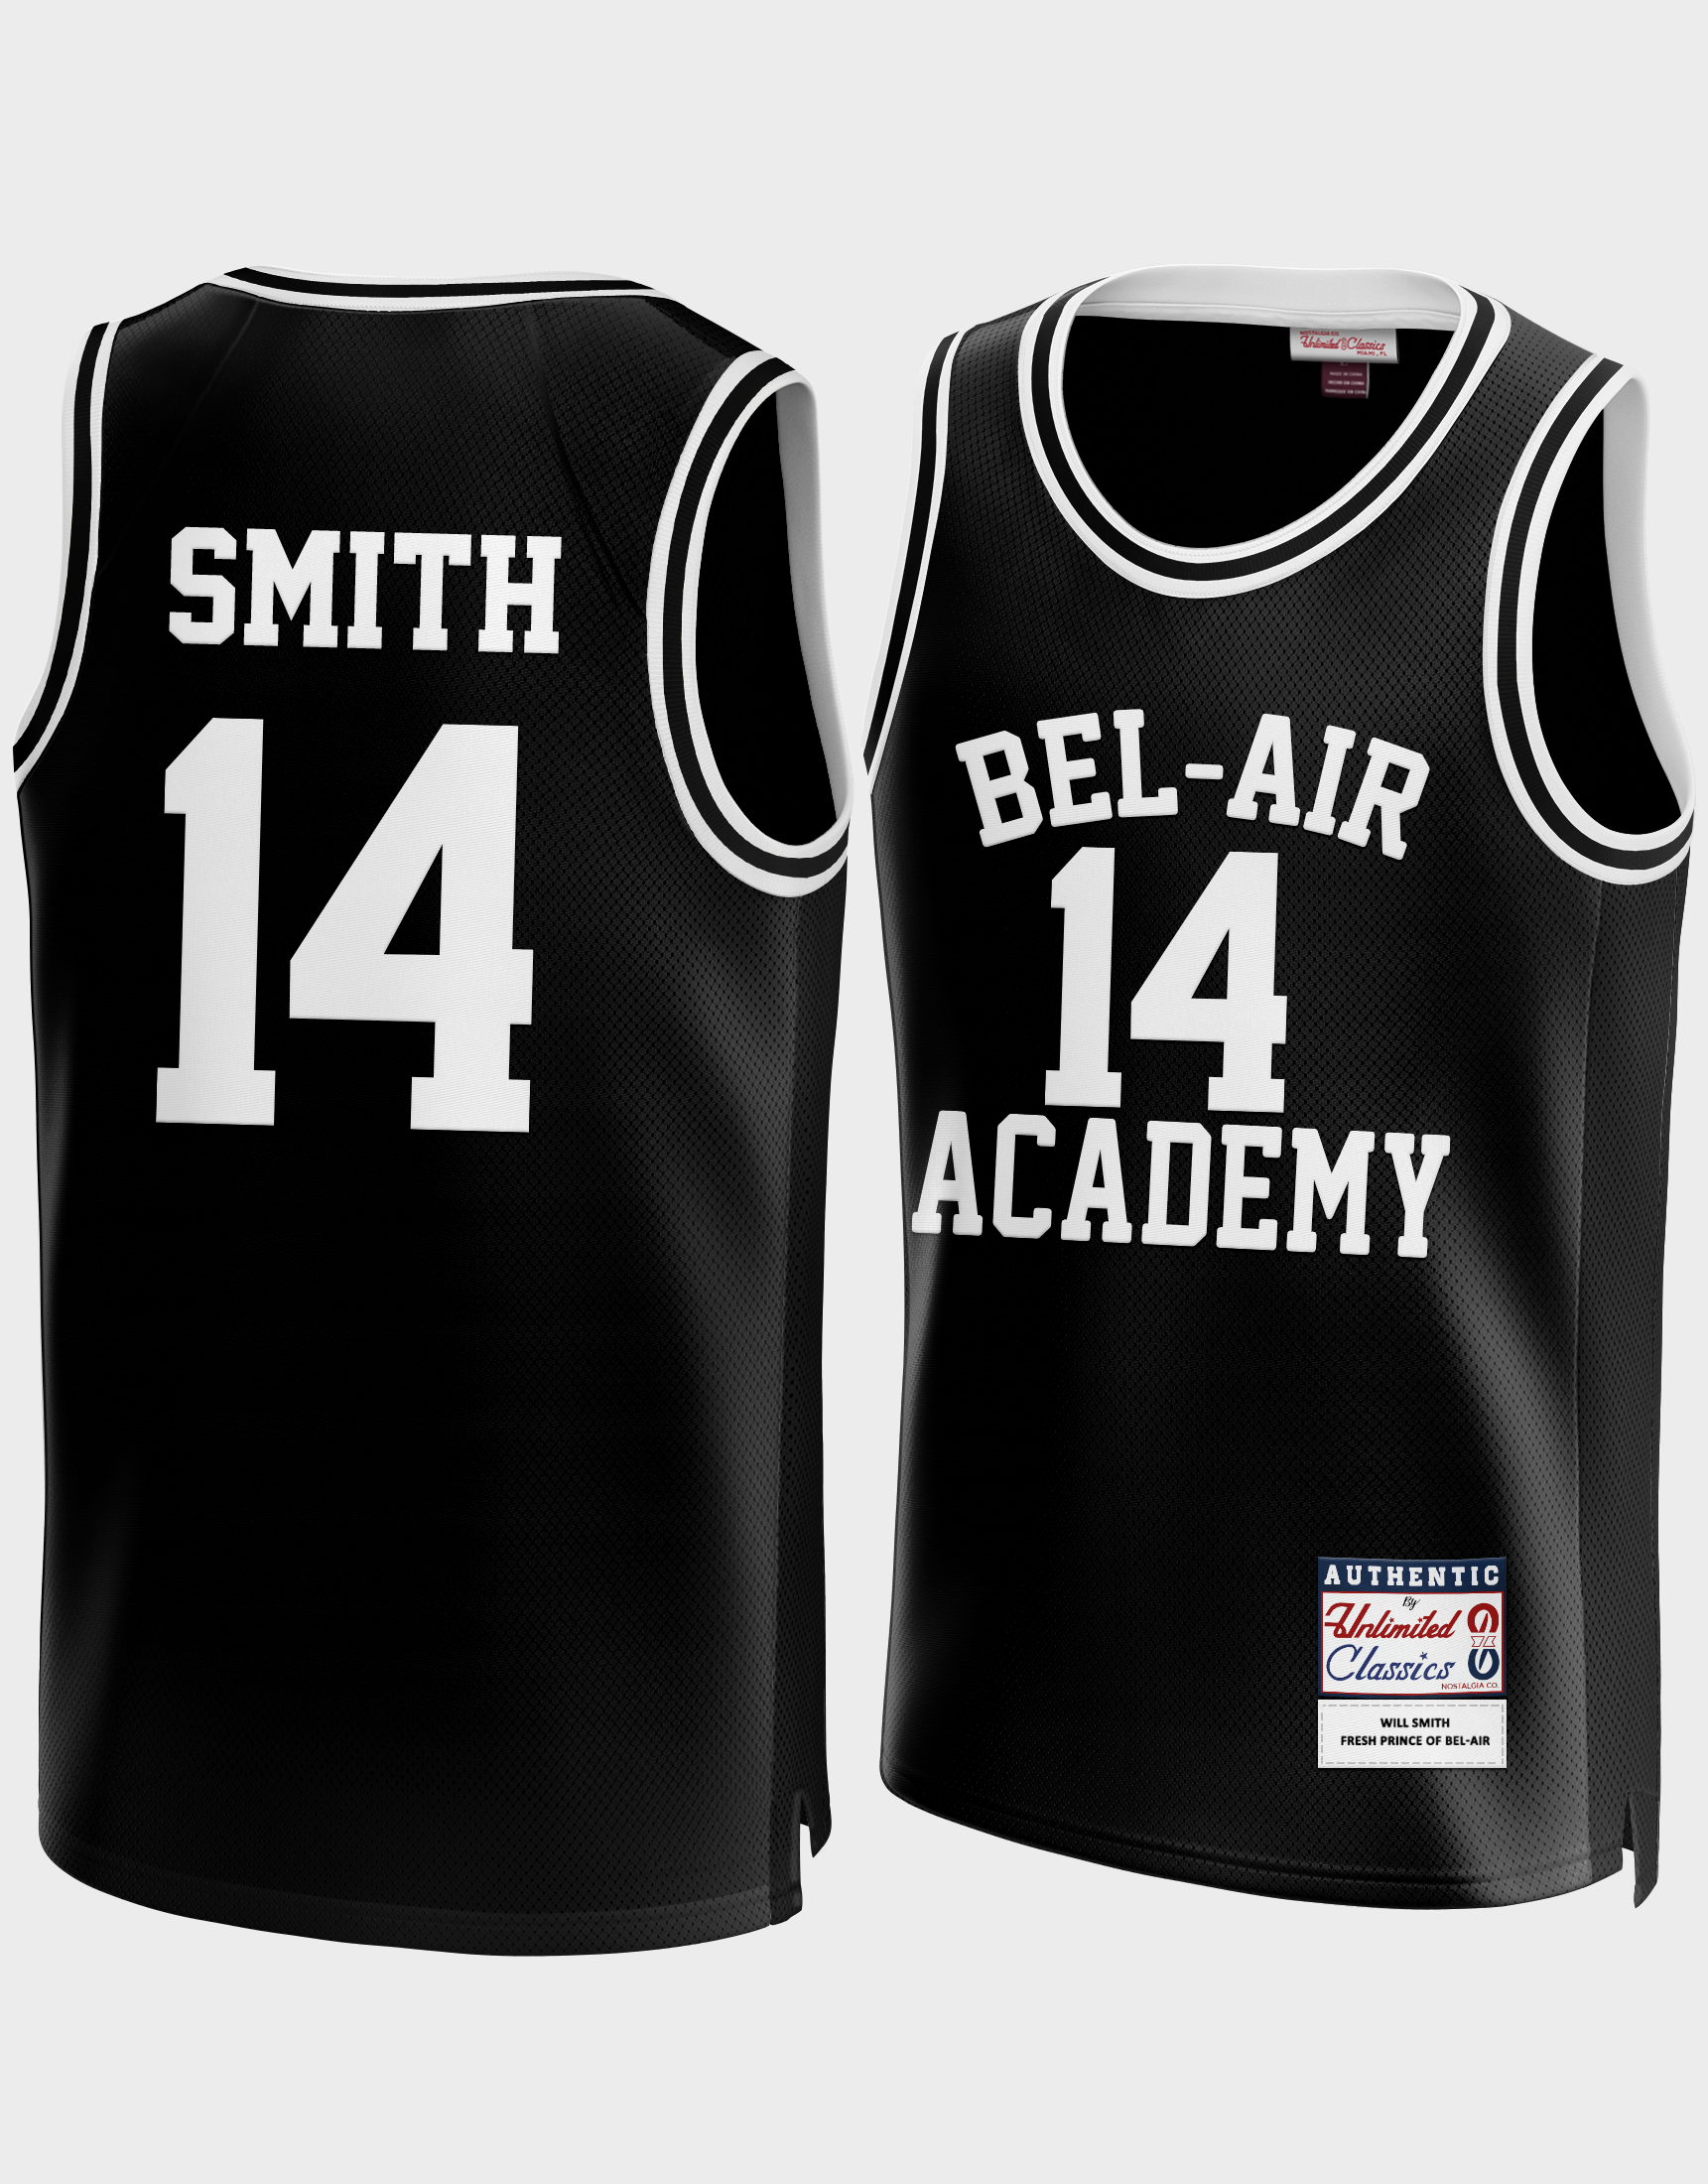 Will Smith #14 Bel-Air Academy Black Jersey